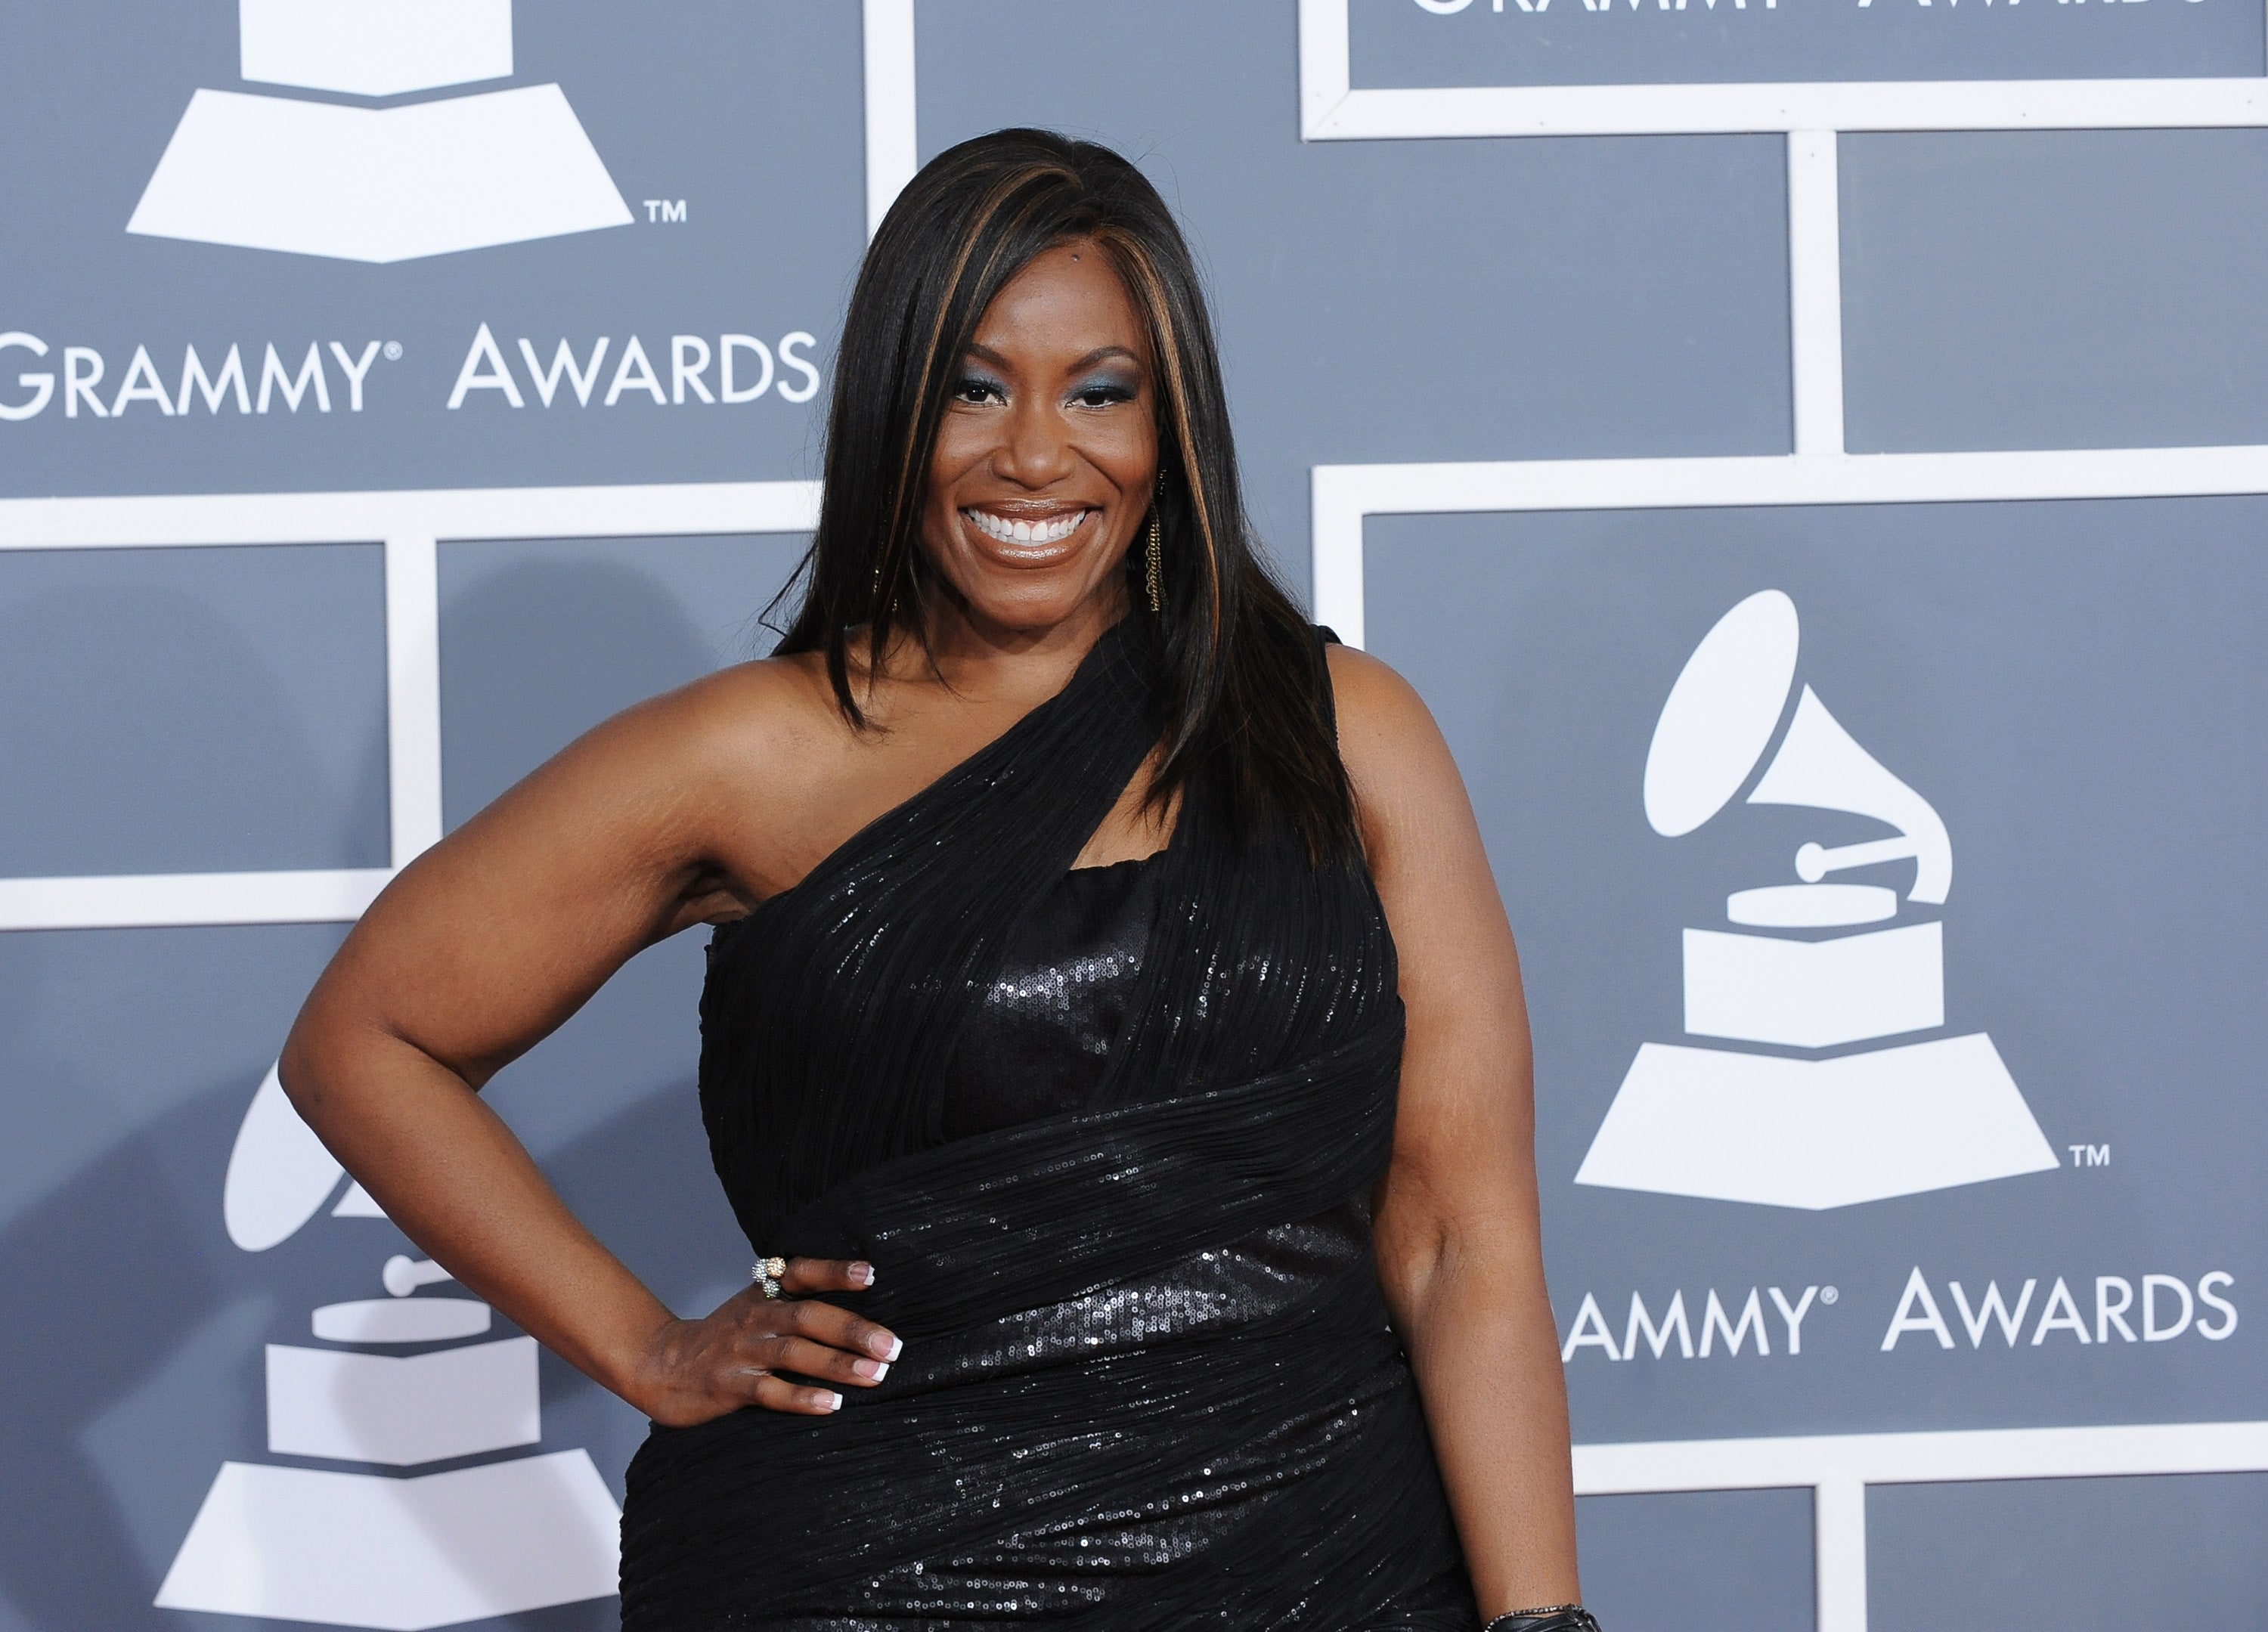 ‘American Idol’ singer and Grammy winner, Mandisa, found dead in her apartment aged 47